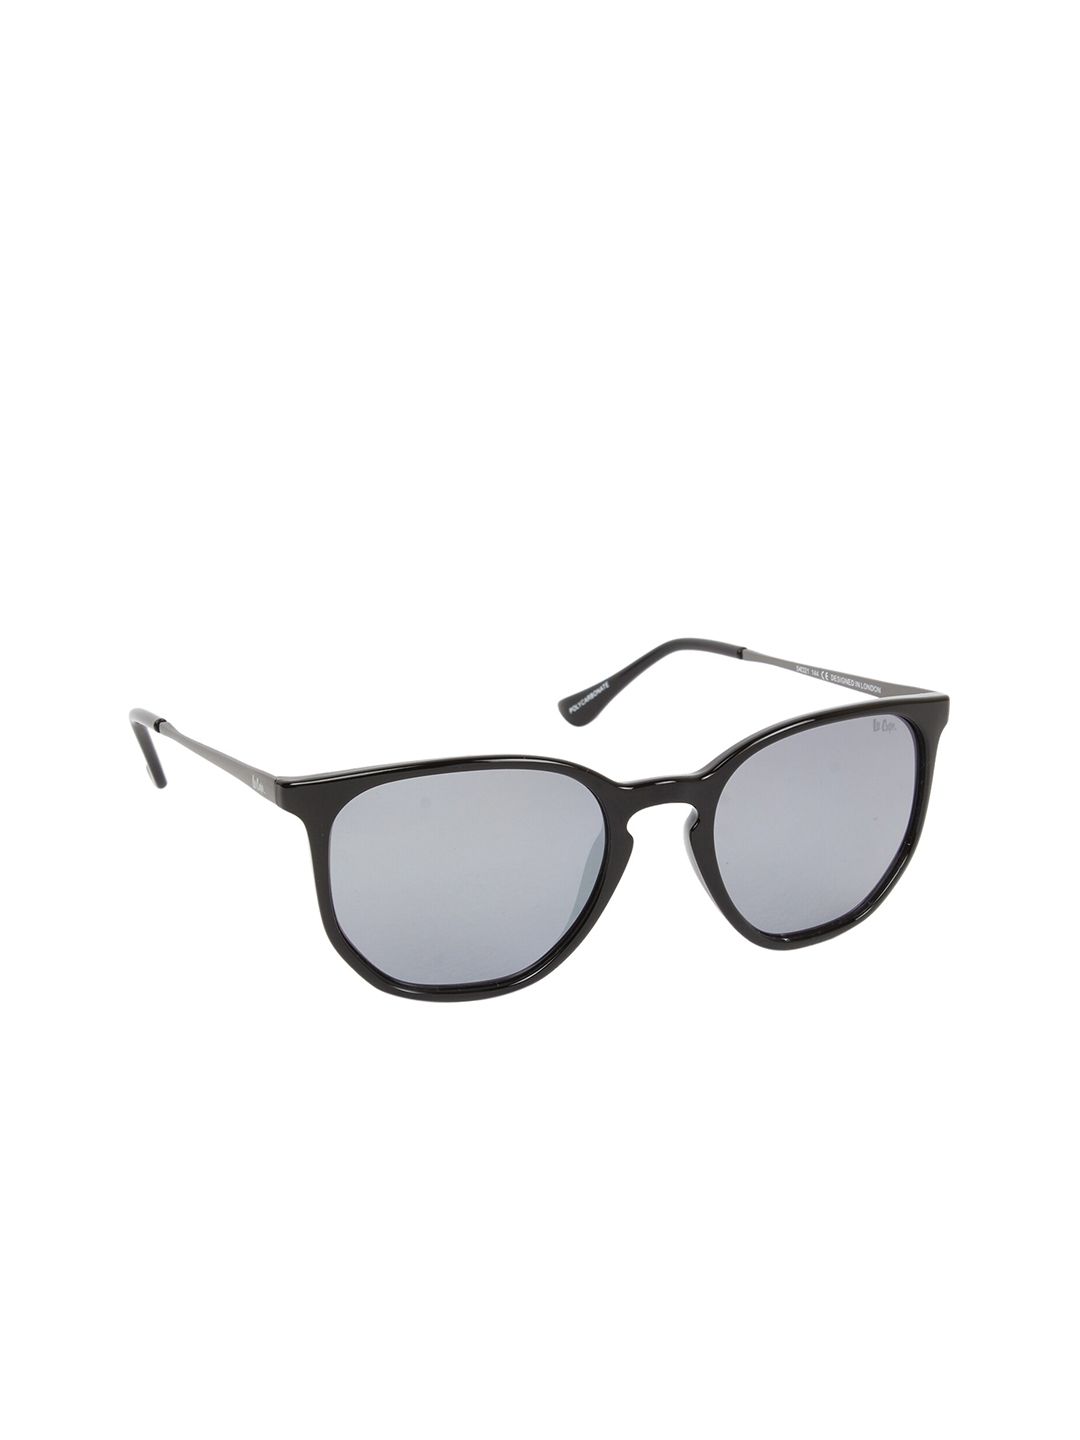 Lee Cooper Women Mirrored Lens & Black Round Sunglasses with UV Protected Lens LC9155NTB Price in India